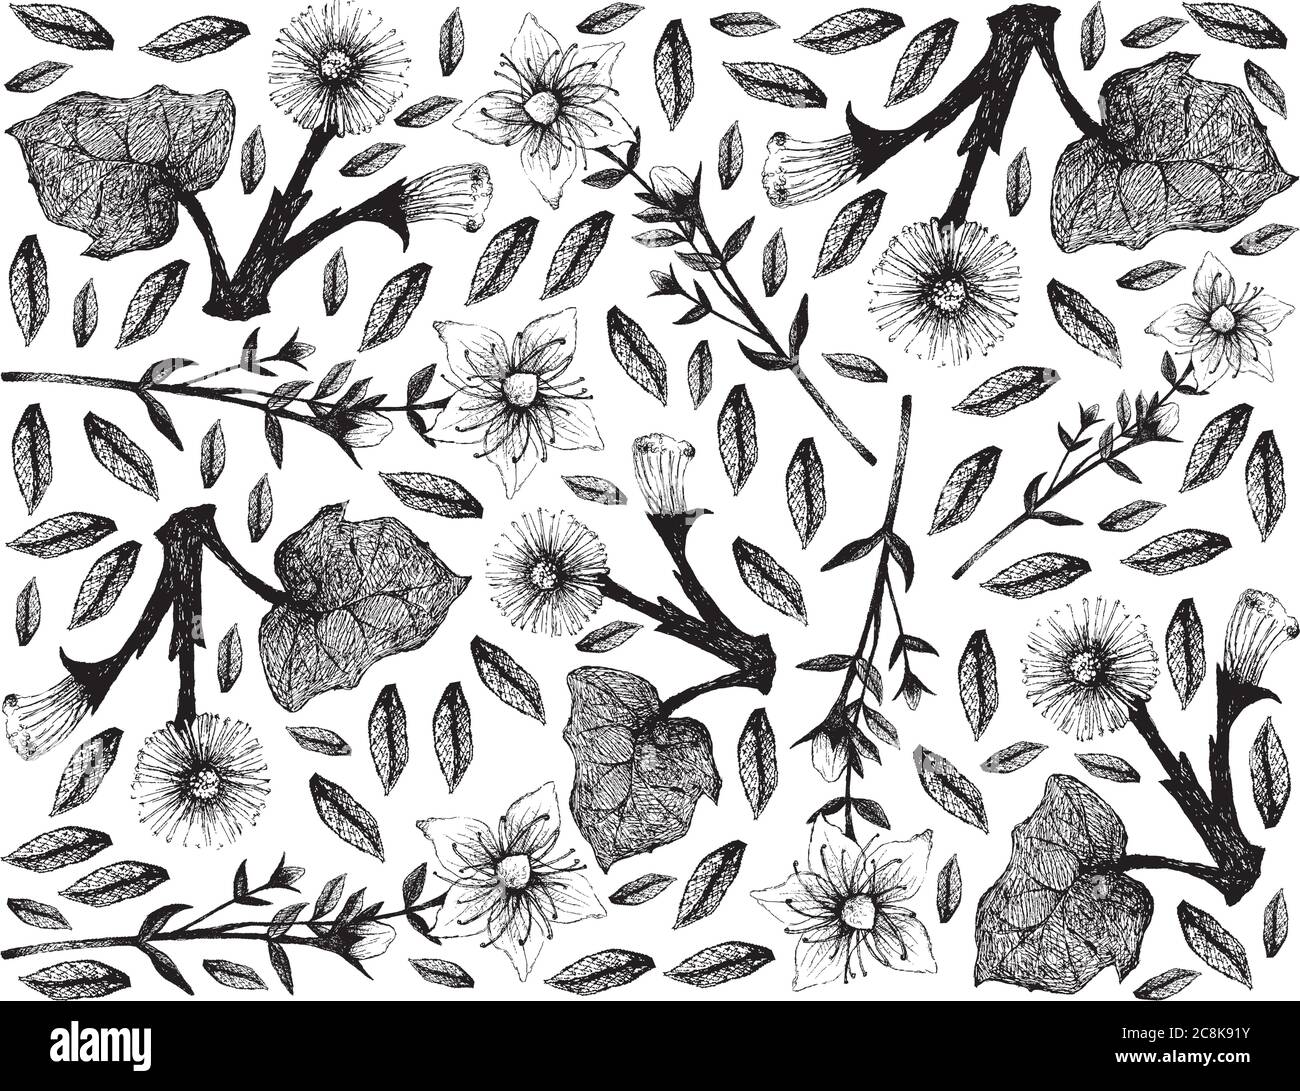 Herbal Flower and Plant, Hand Drawn Background of Hypericum Perforatum or St. John's Wort and Coltsfoot or Tussilago Farfara Plants Use in Herbalism a Stock Vector